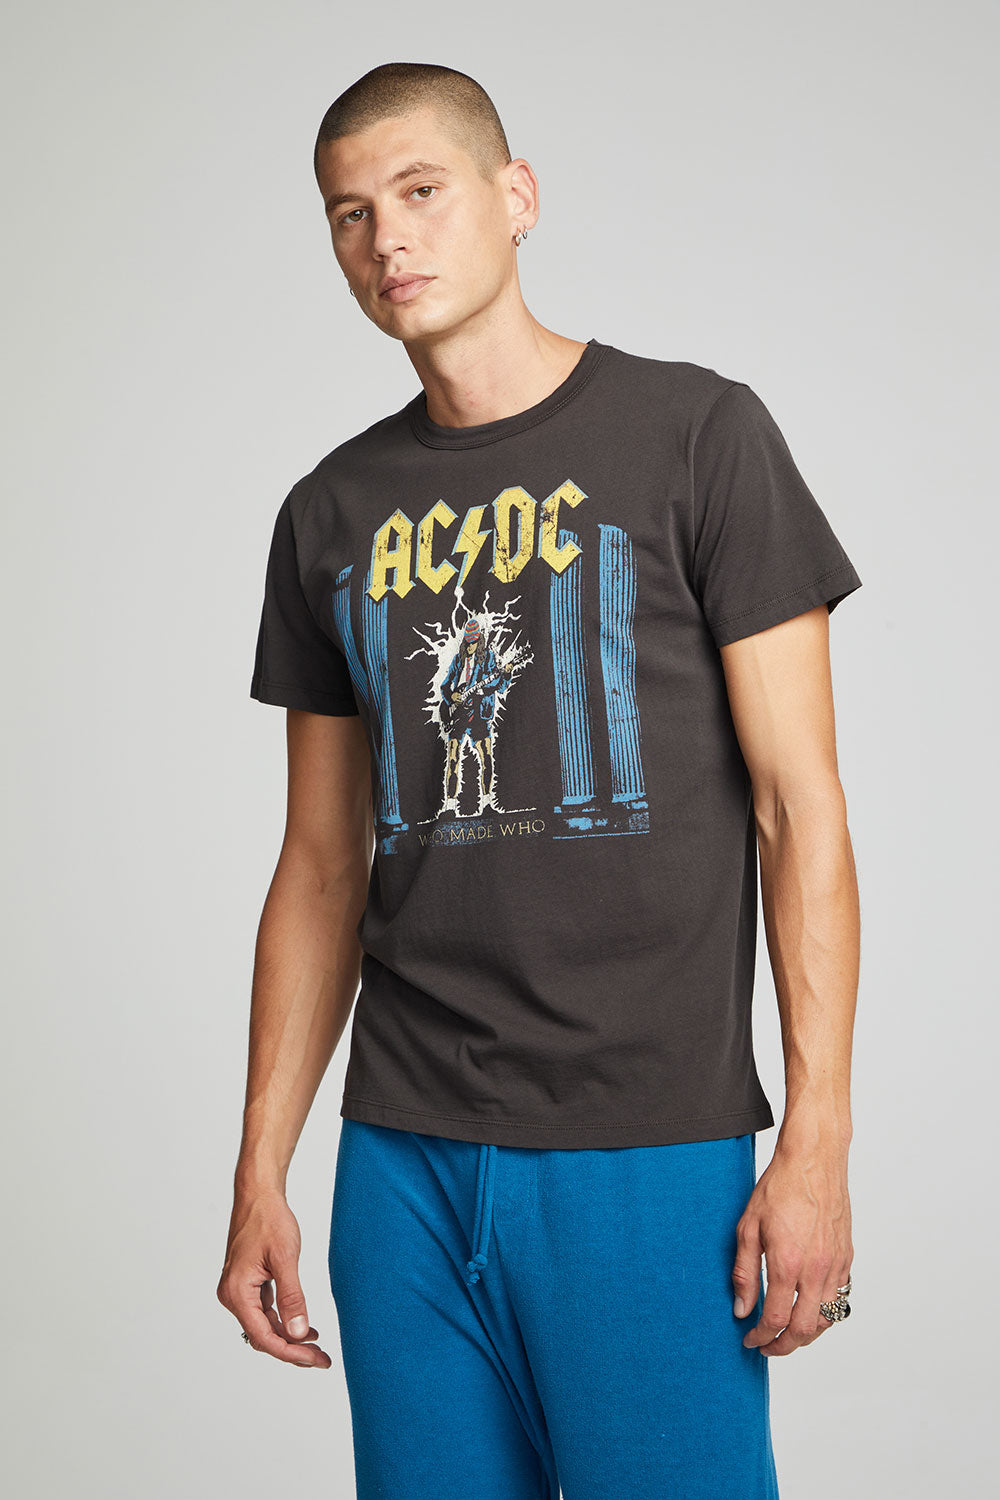 AC/DC - Who Made Who MENS chaserbrand